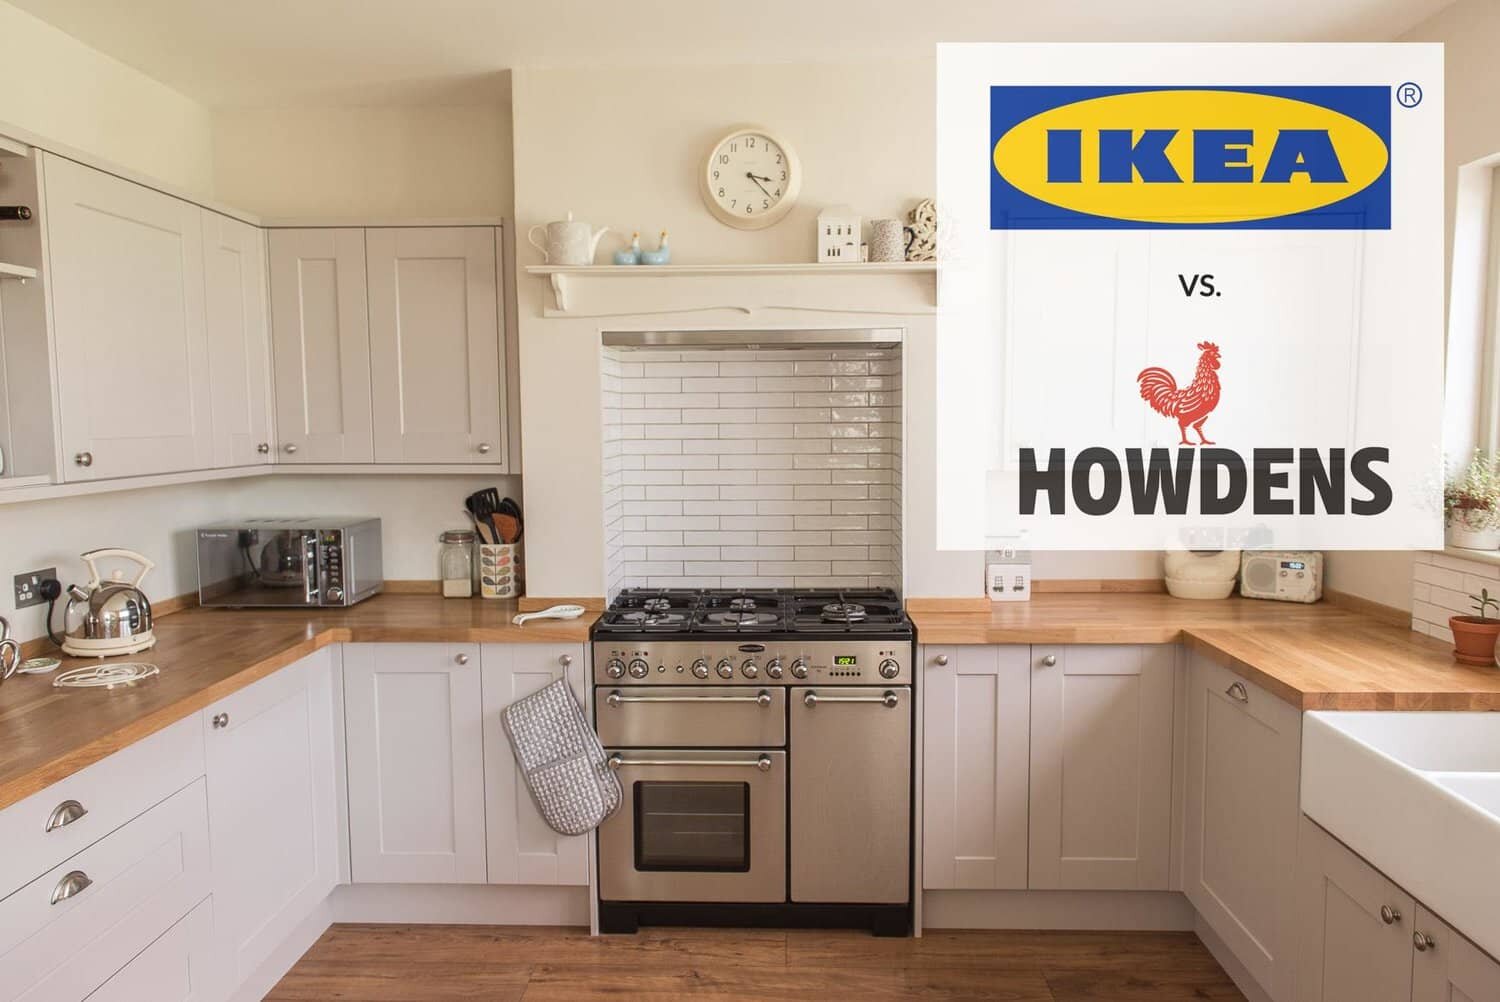 HOWDENS VS IKEA Why we turned down an IKEA kitchen for Howdens ...